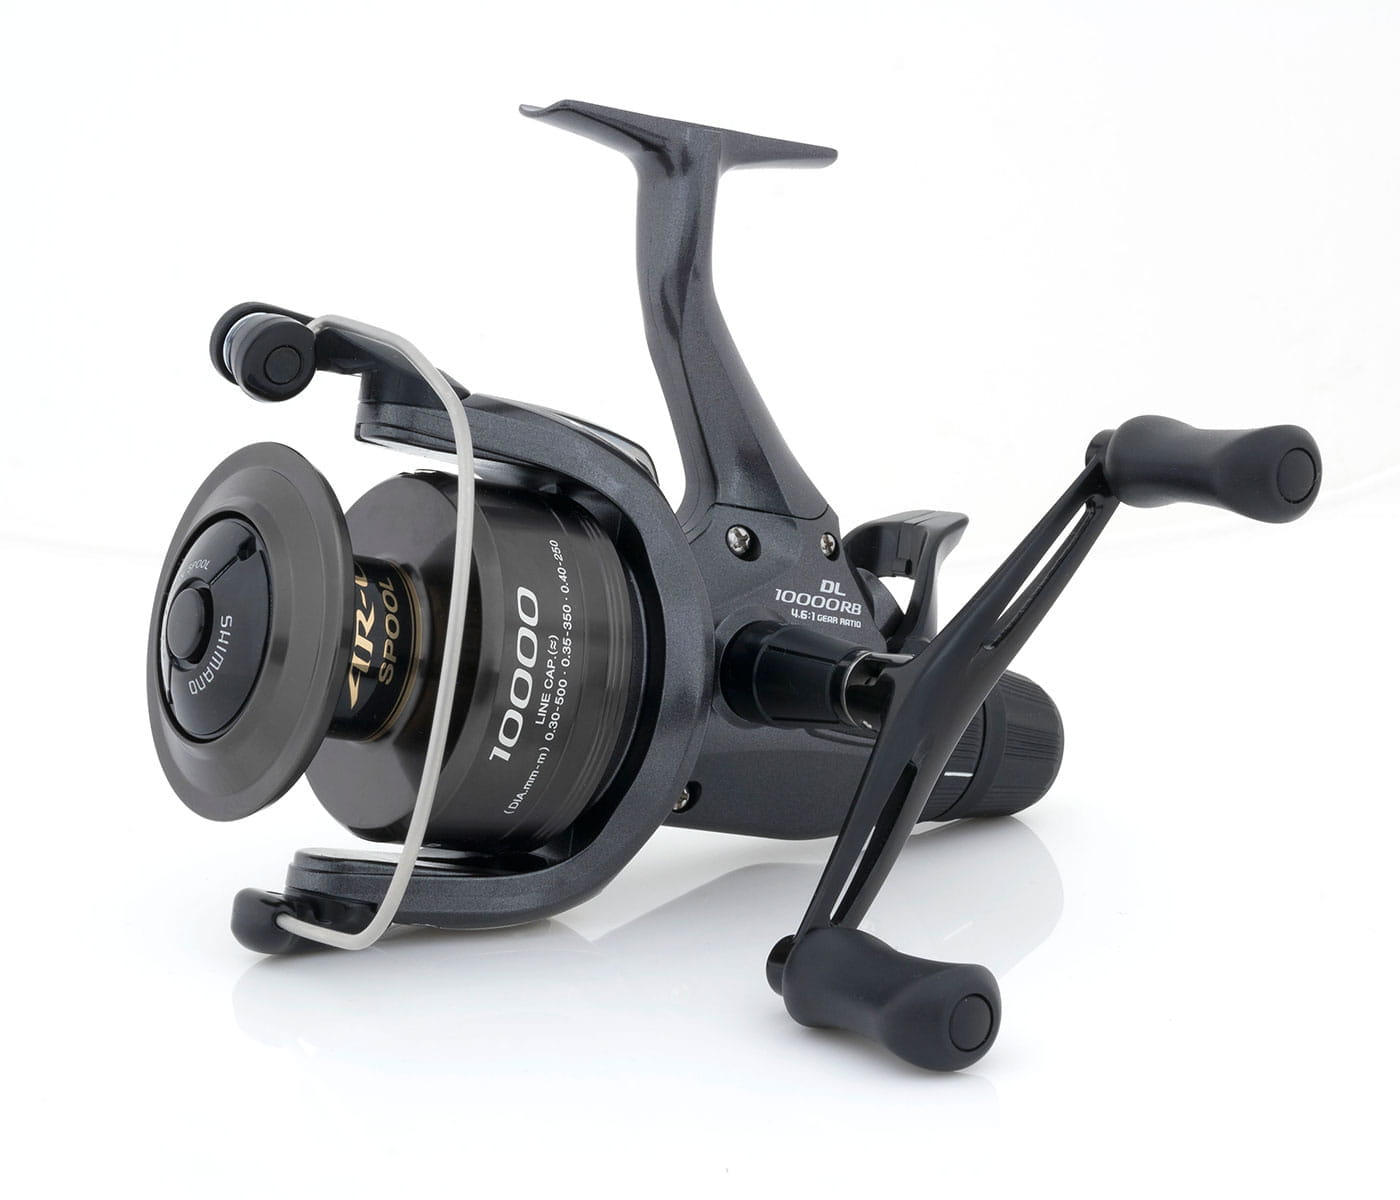 shimano BR 4500 bait runner fishing reel - how to service and